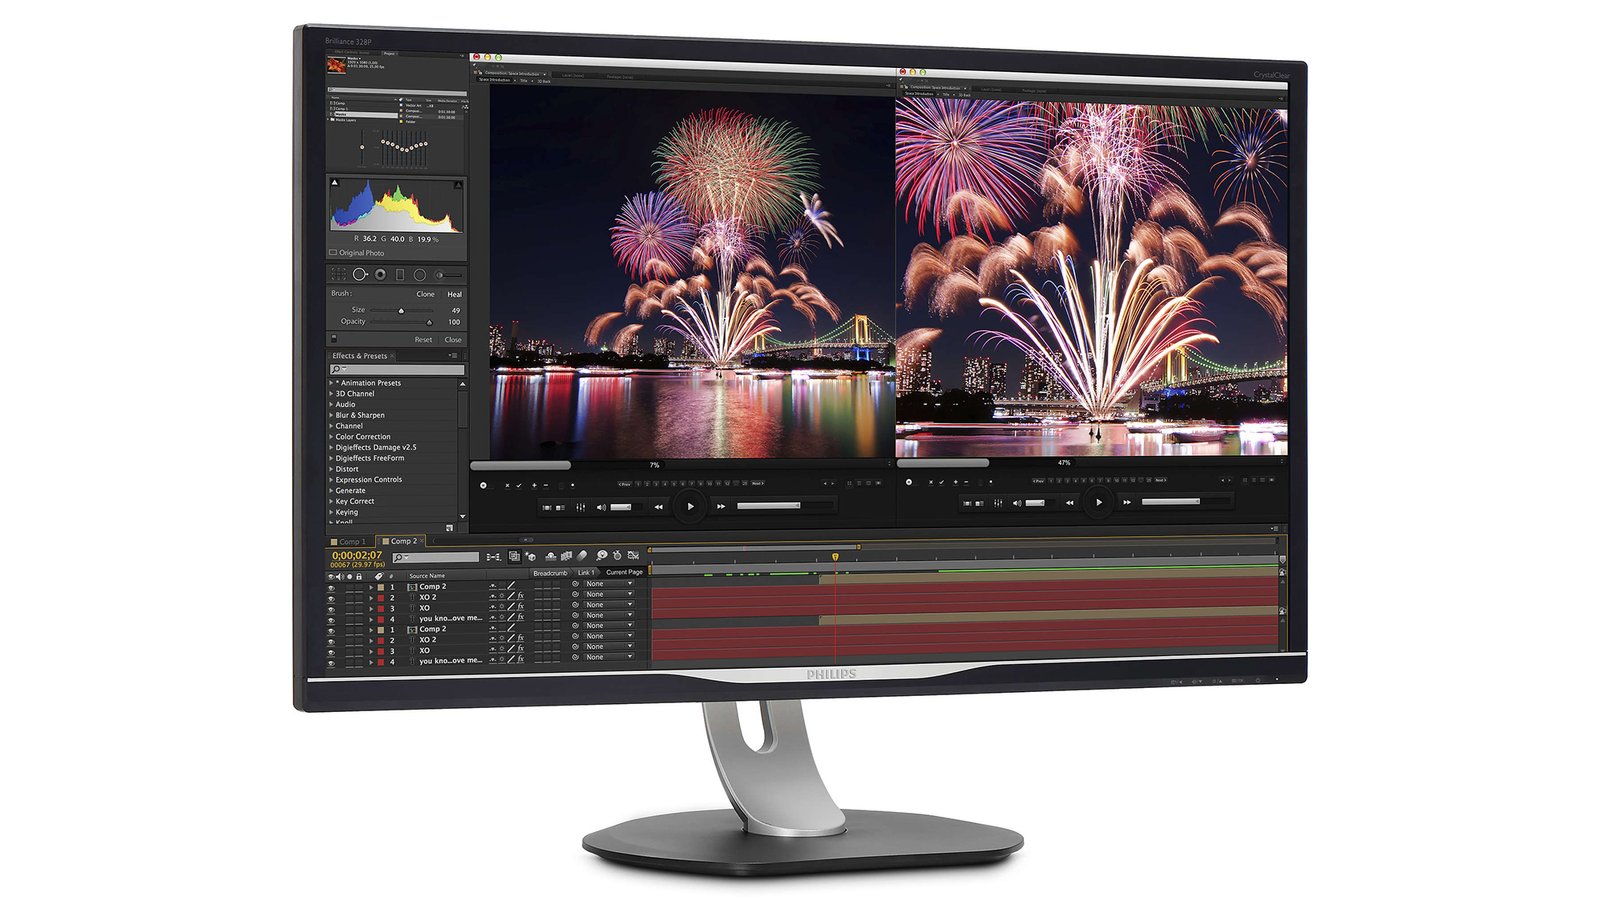 Philips Brilliance 328P6- Best 4k monitor for 2021